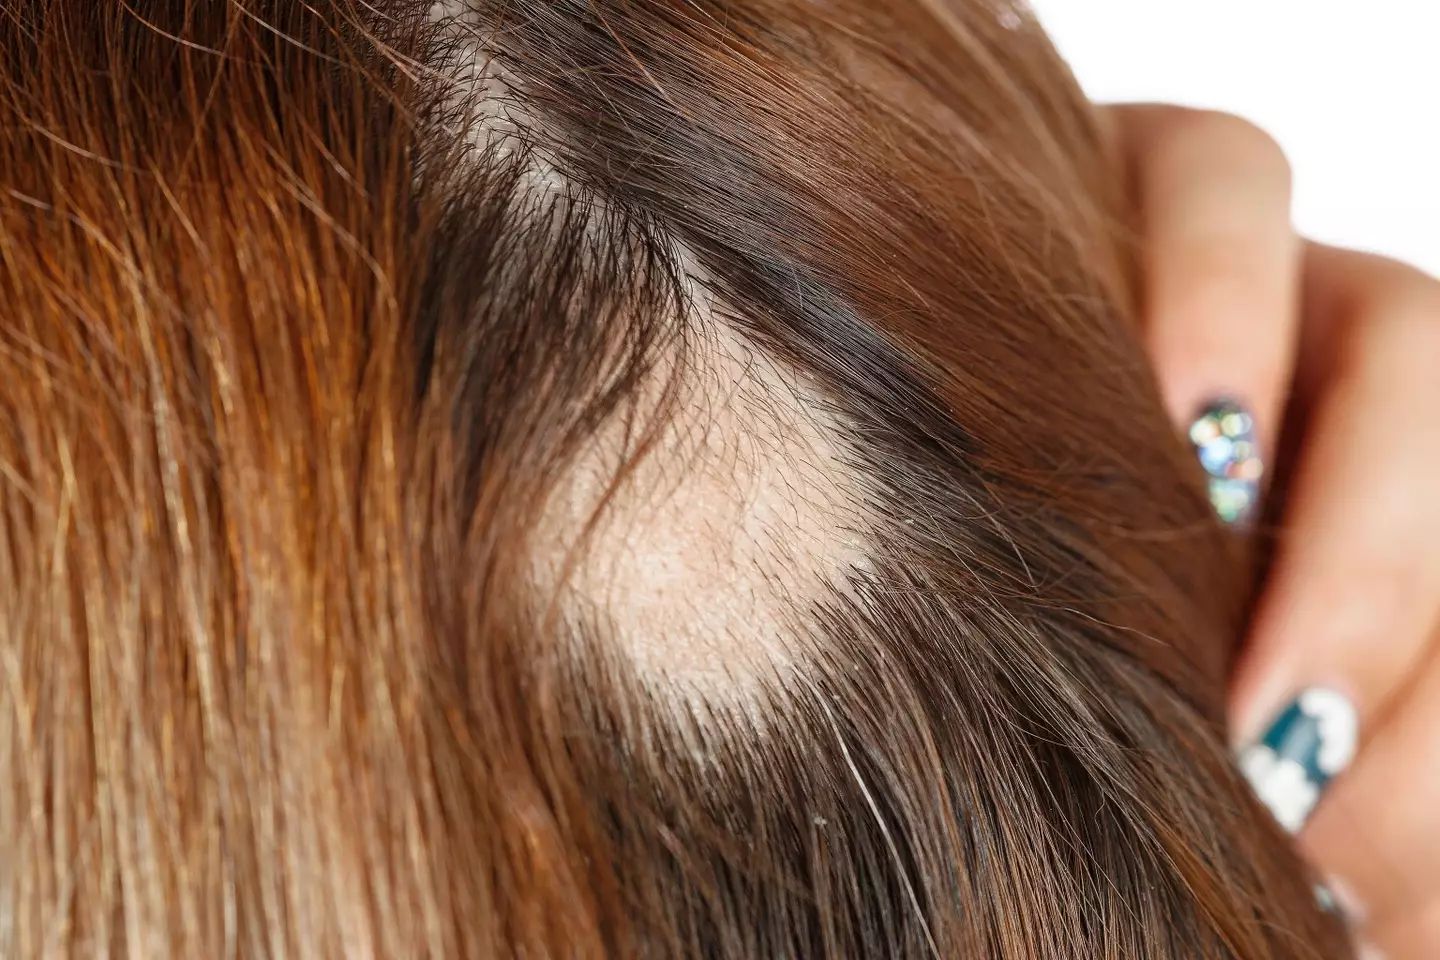 Researchers in the US have discovered a new drug for alopecia sufferers.